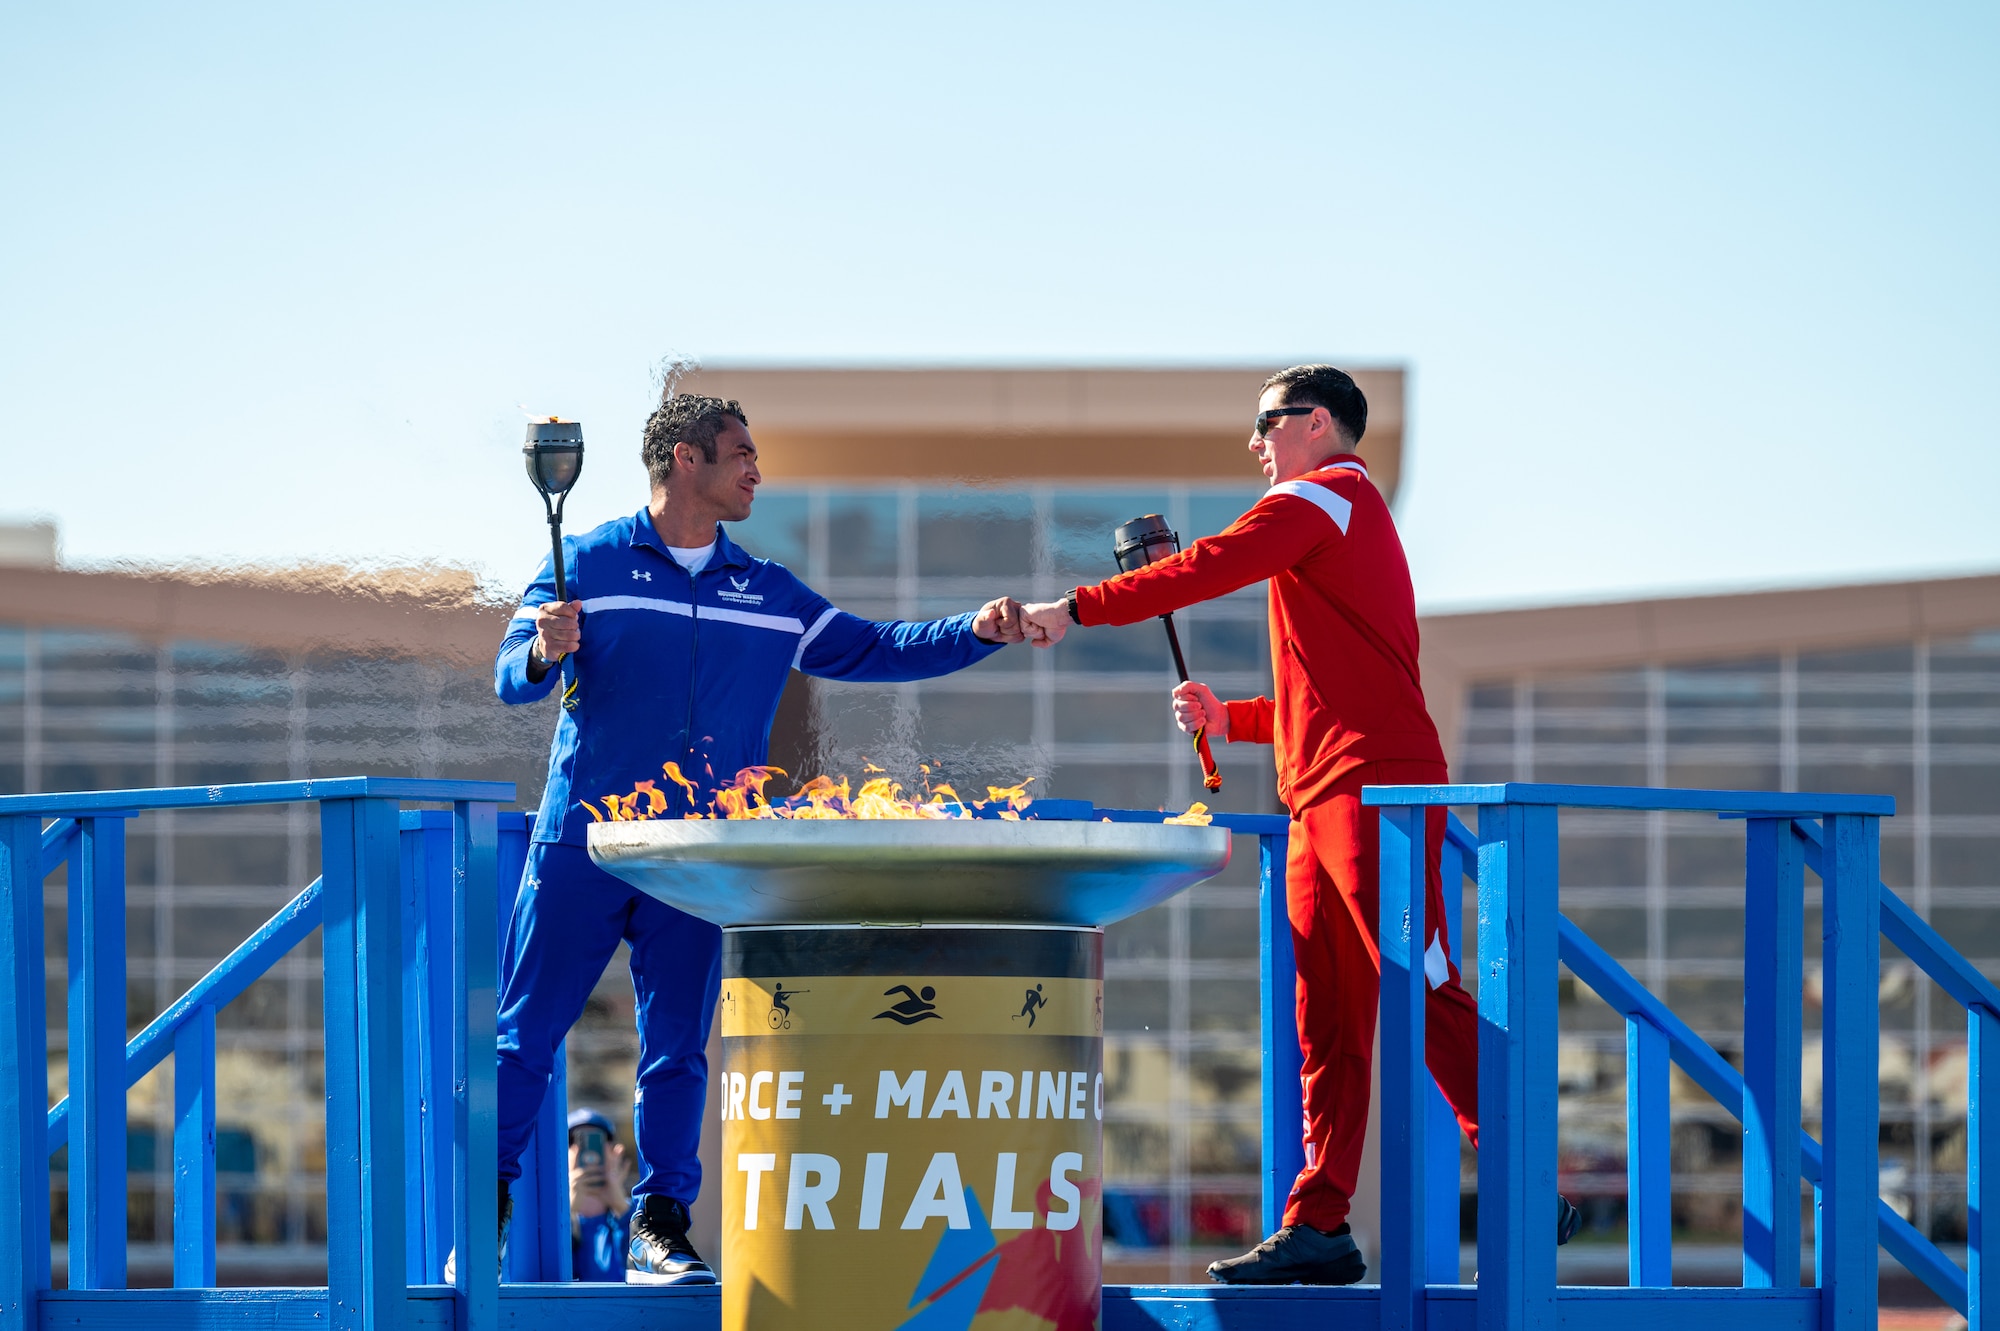 Retired U.S. Air Force Tech. Sgt. Chris Ferrell, left, bumps fist with Marine Corps Staff Sgt. Harry Harth IV, both torch bearers for their respective teams, during the opening ceremony of the 2024 Air Force and Marine Corps trials at Nellis Air Force Base, Nevada, March 8, 2024.